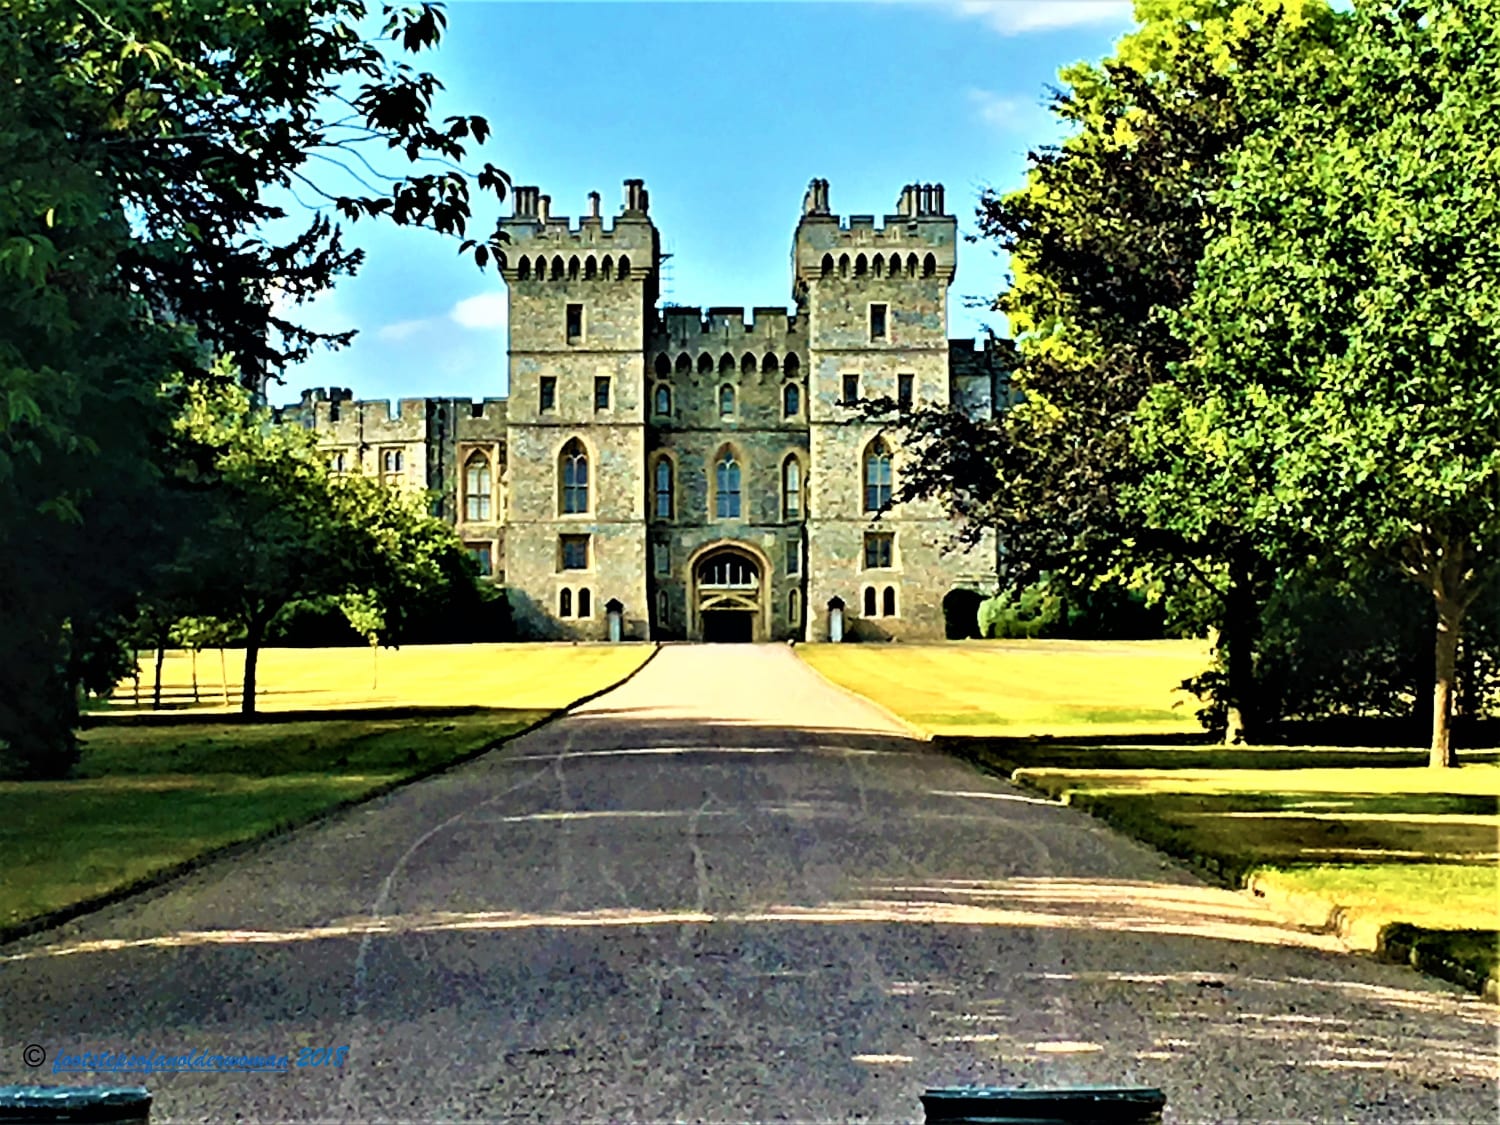 Windsor Castle and Windsor in 1 day-what to see, do and experience in 1 day